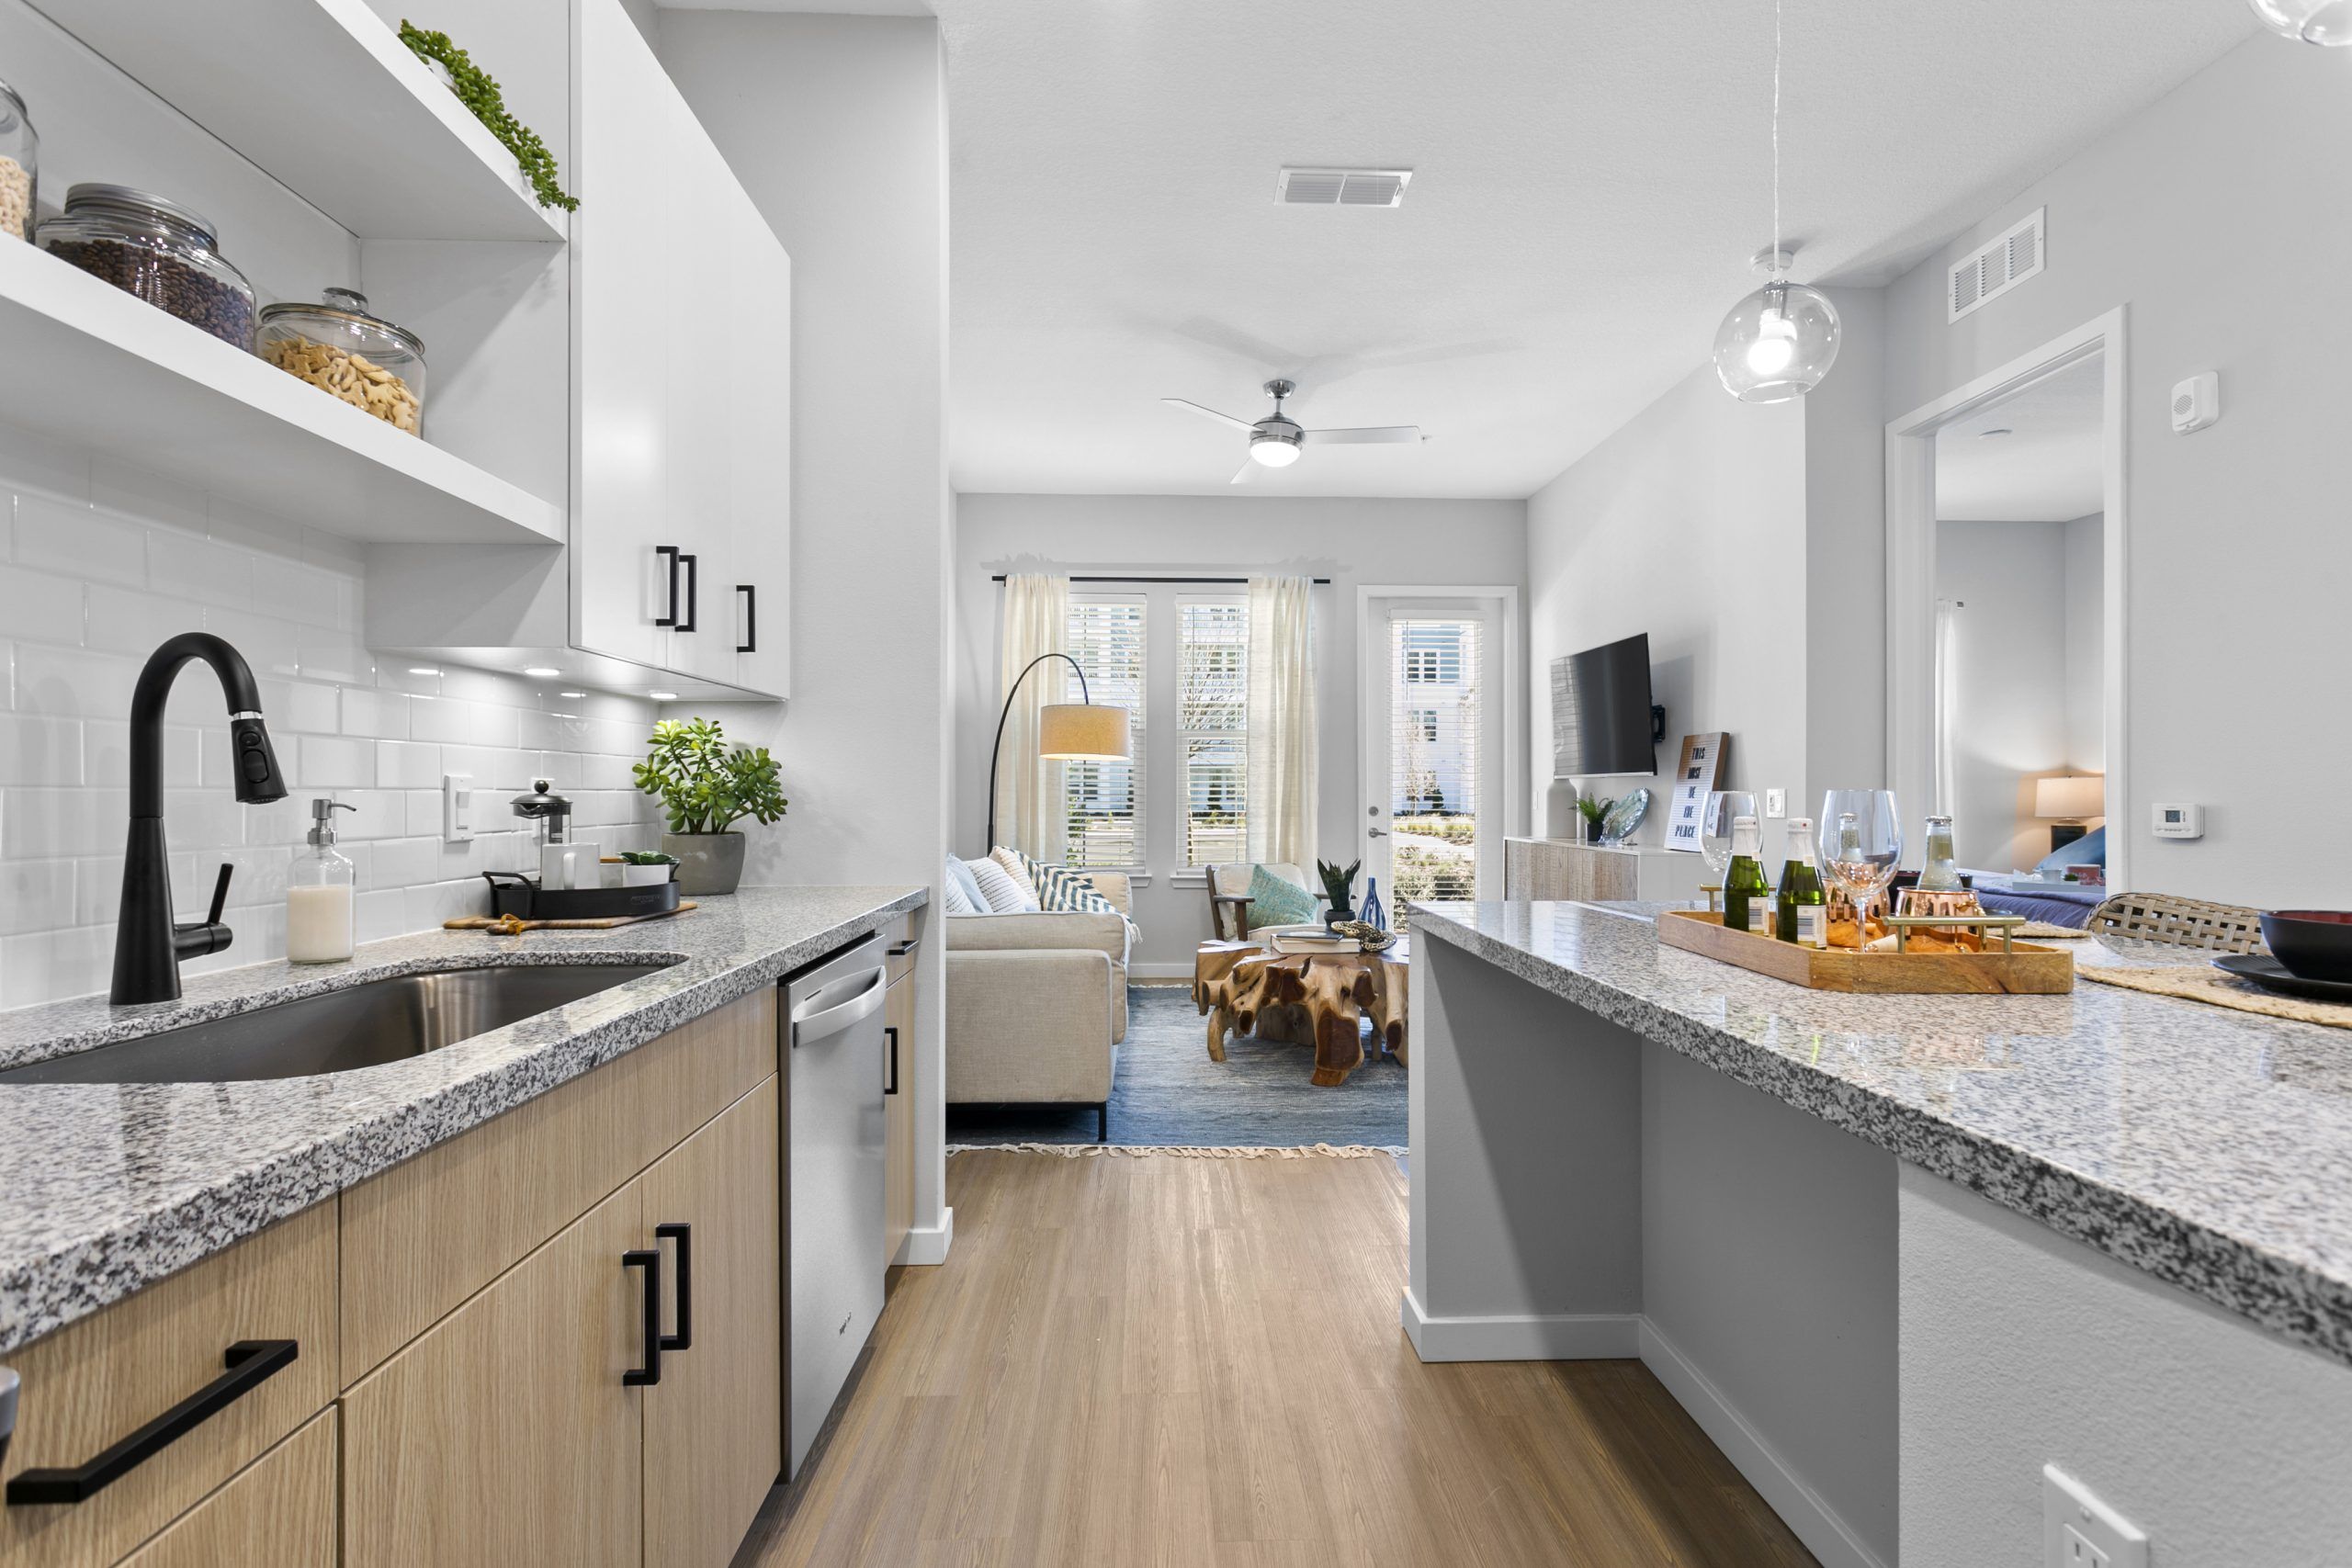 Bright and airy kitchen at Alta Belleair apartment.